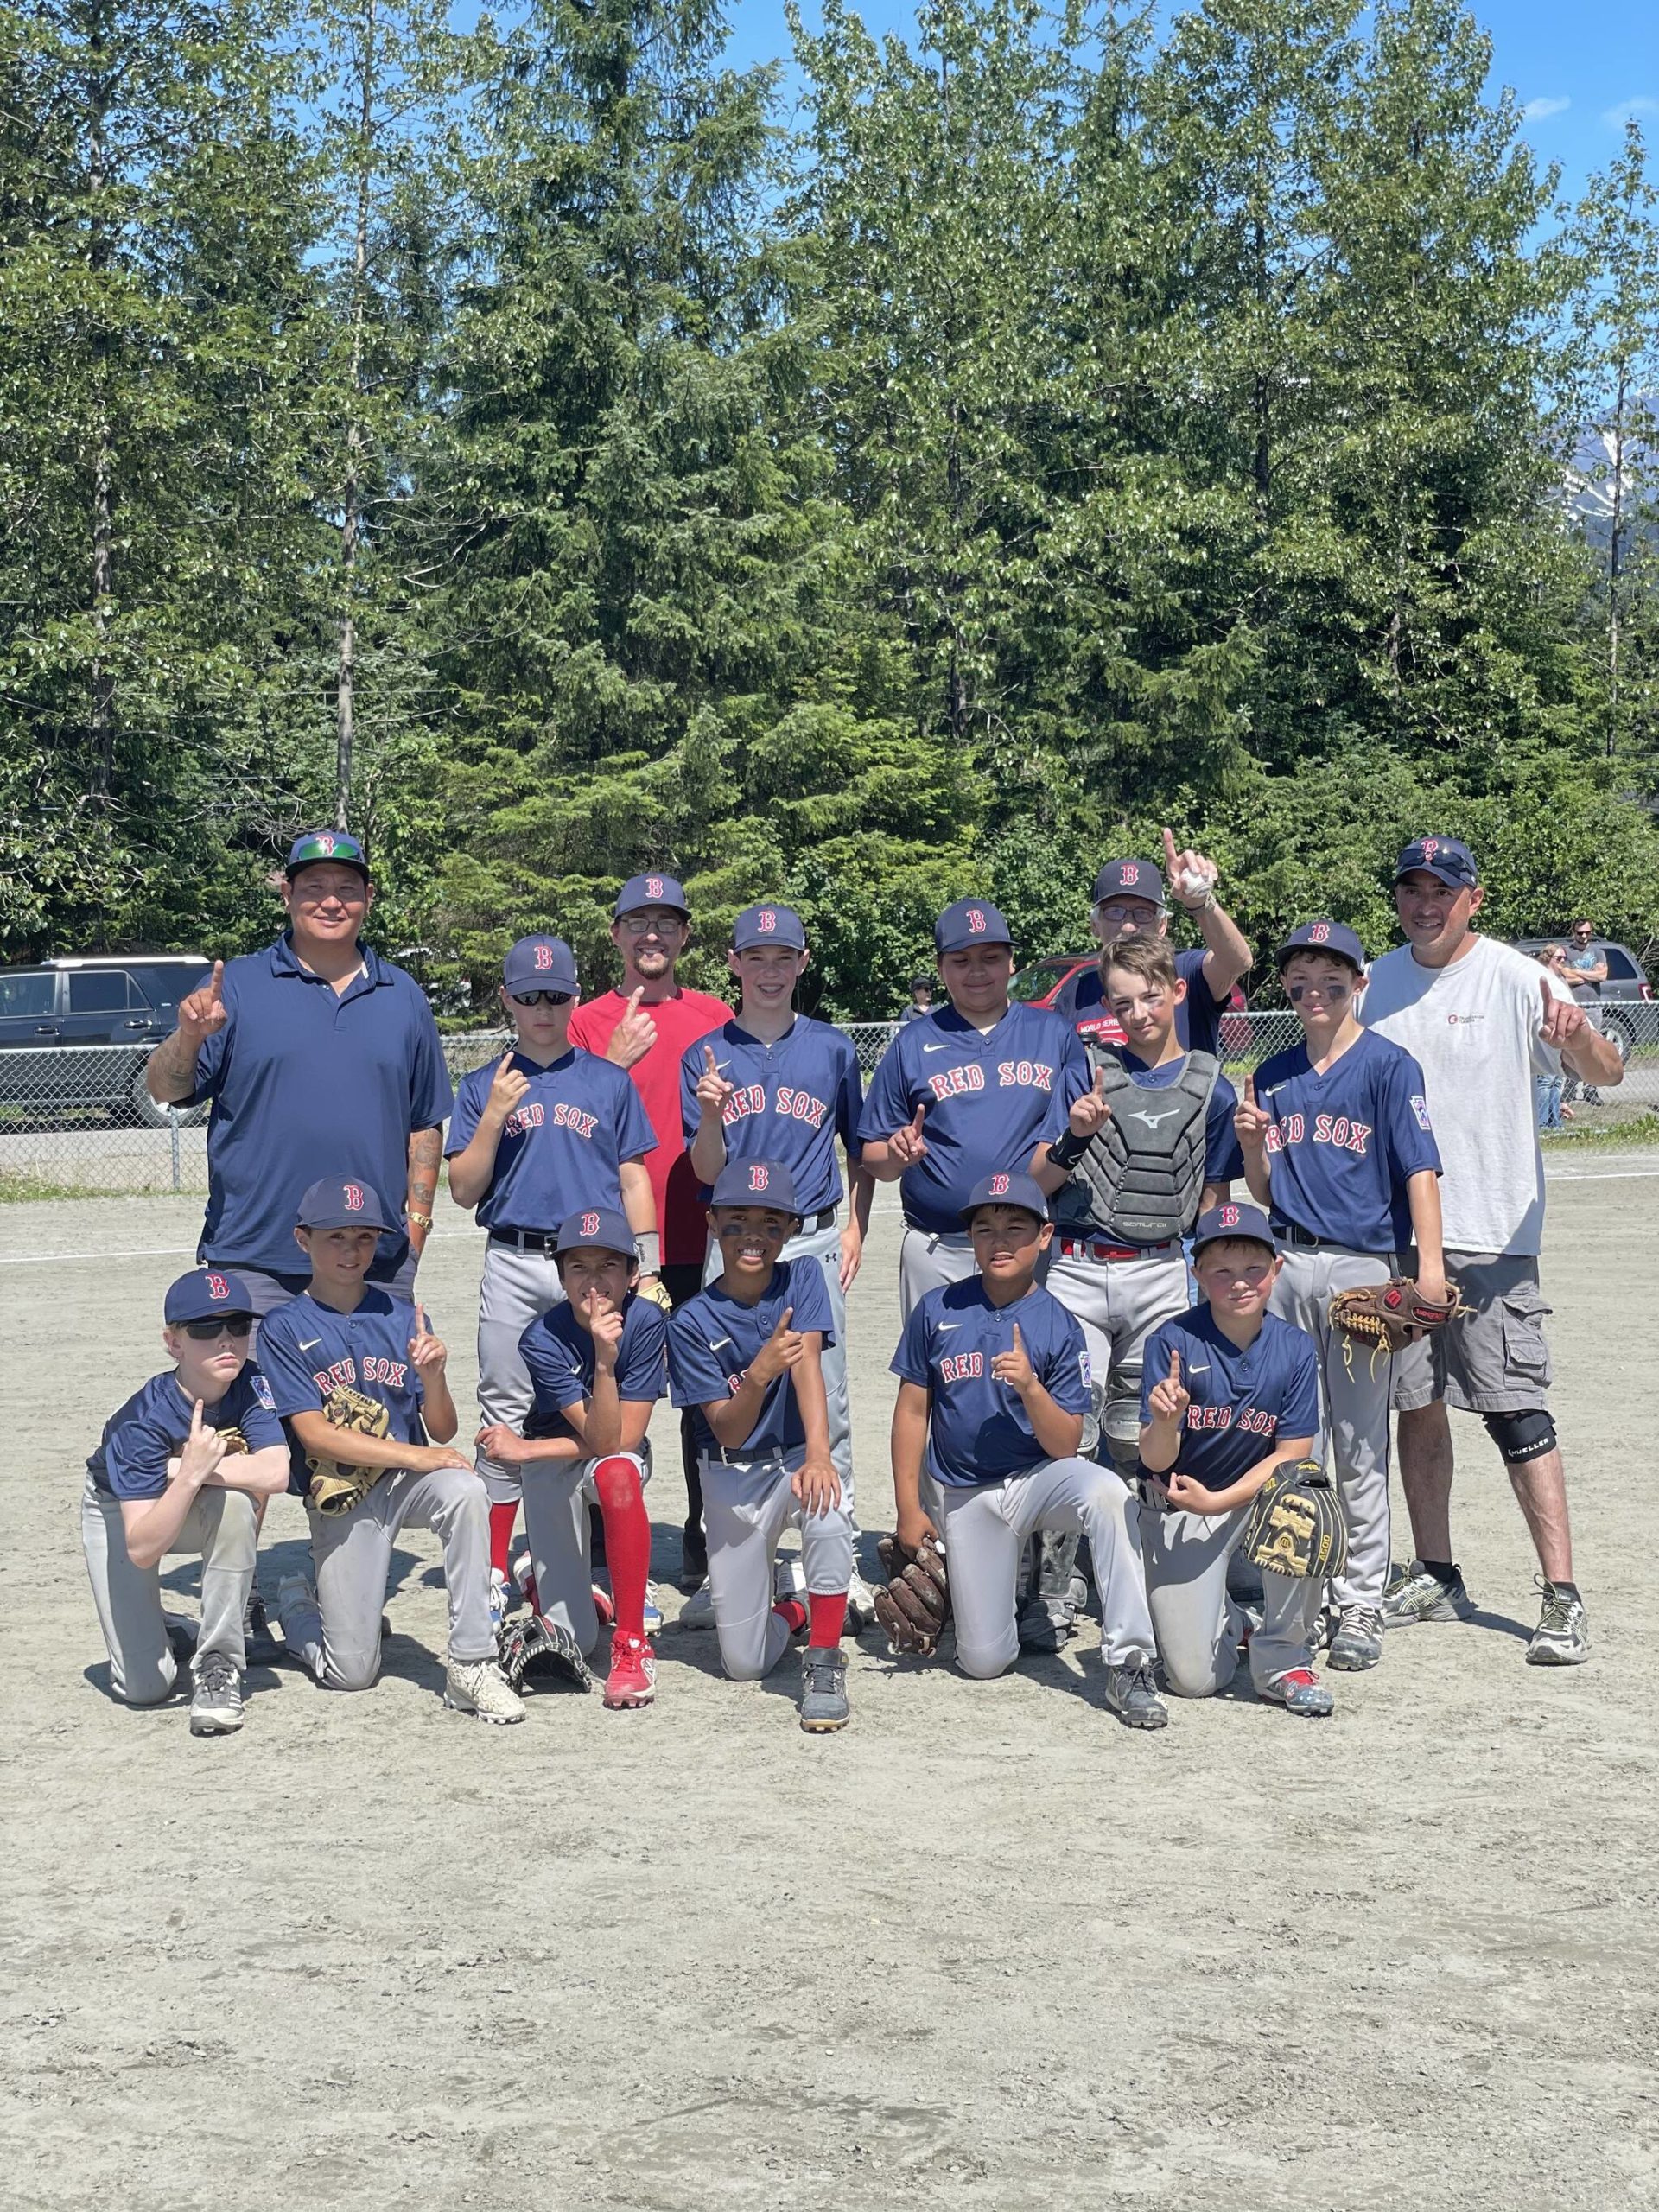 The 2022 Gastineau Little League Majors Division champs are the Juneau Pizza Red Sox. Team members are: (Back row, left to right) manager Nick Nelson, Darwin Decena, coach John Randolf, Andrew Sanders, Joaquin Ramirez, coach PJ, Jamison Randolf, Brenner Harralston, coach Tom Pegues, (front row, left to right) Liam keisseling, Jack Pegues, Micah Nelson, Myles Pasion, Marquis Lim, Matthew Shockly and Fischer Kolodziejski (not pictured.) (Courtesy Photo / Nick Nelson)